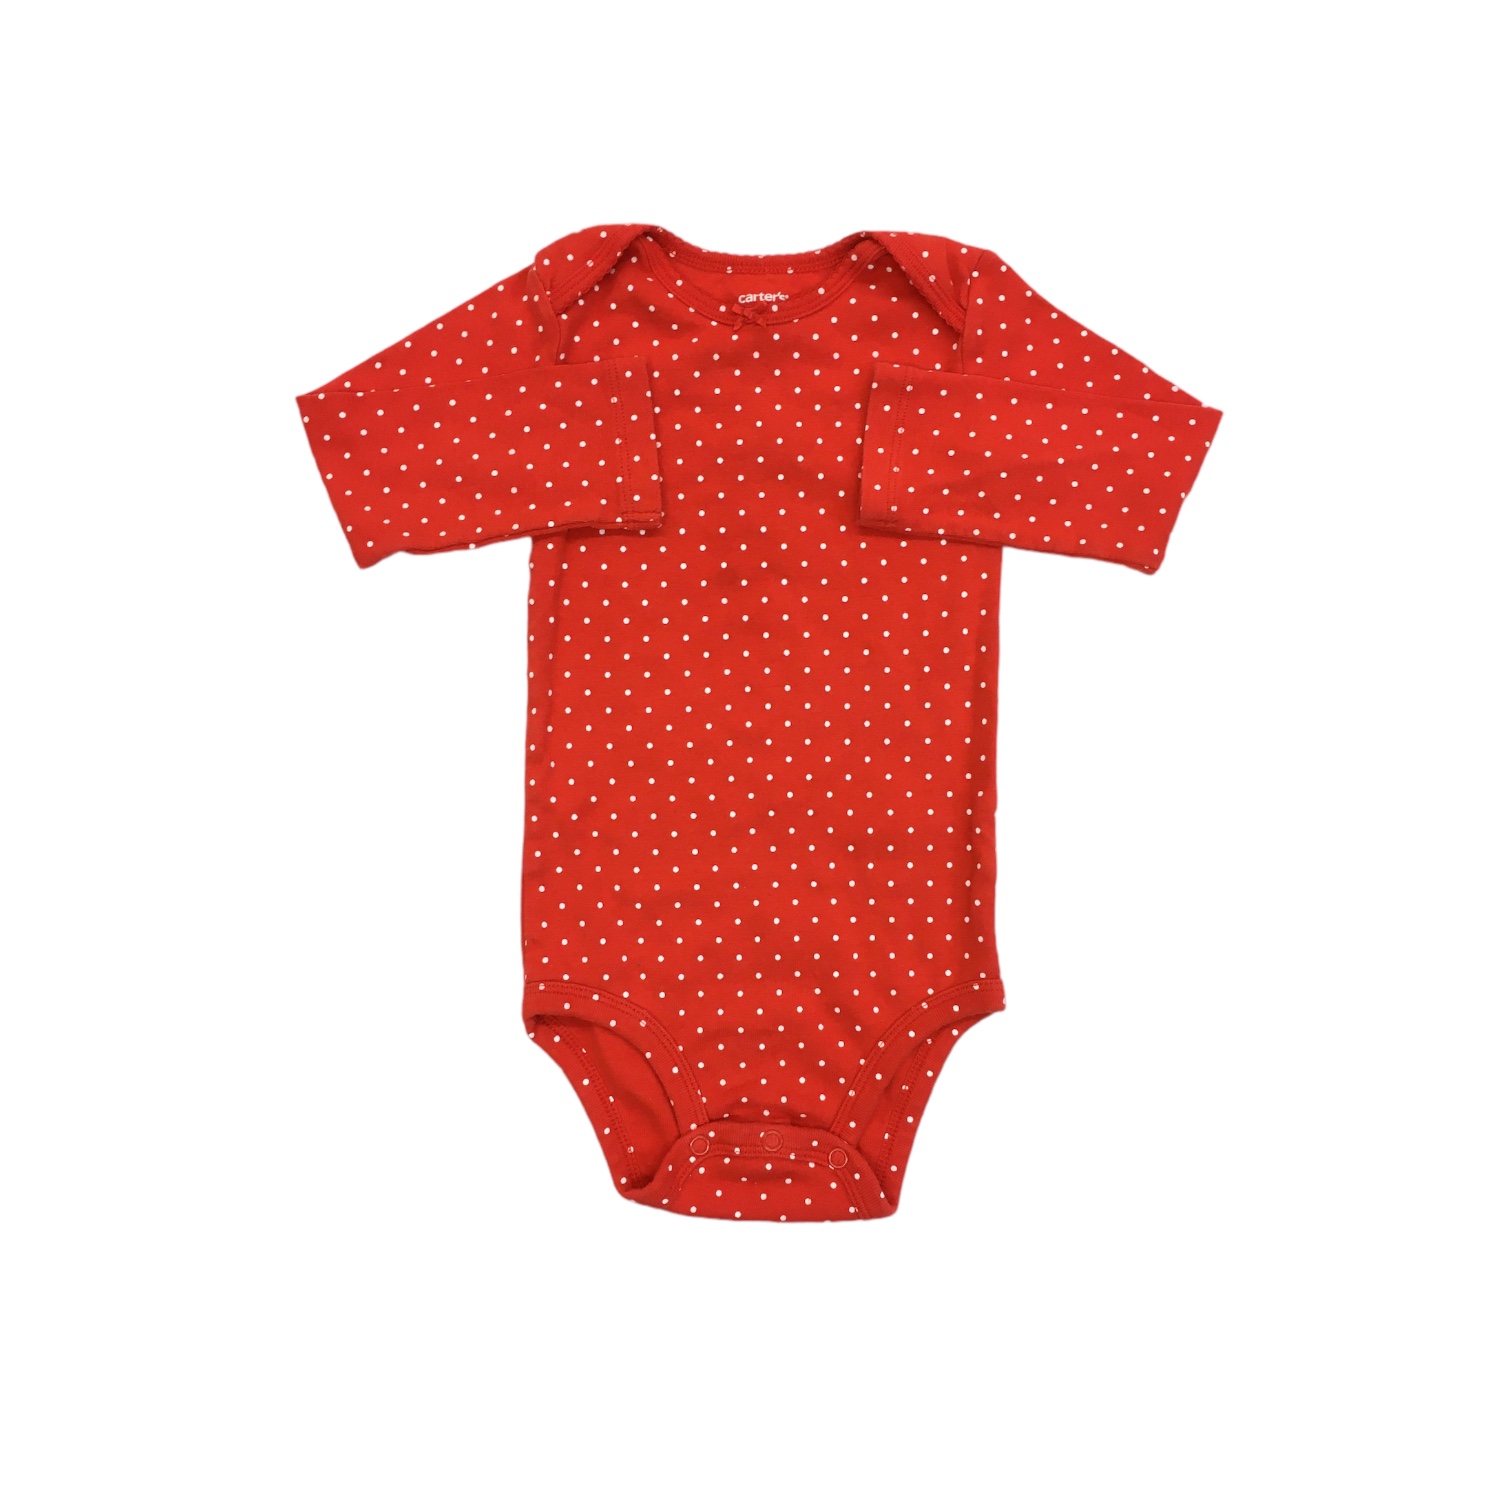 Puma x Cocomelon Toddlers' Shortsleeve Romper